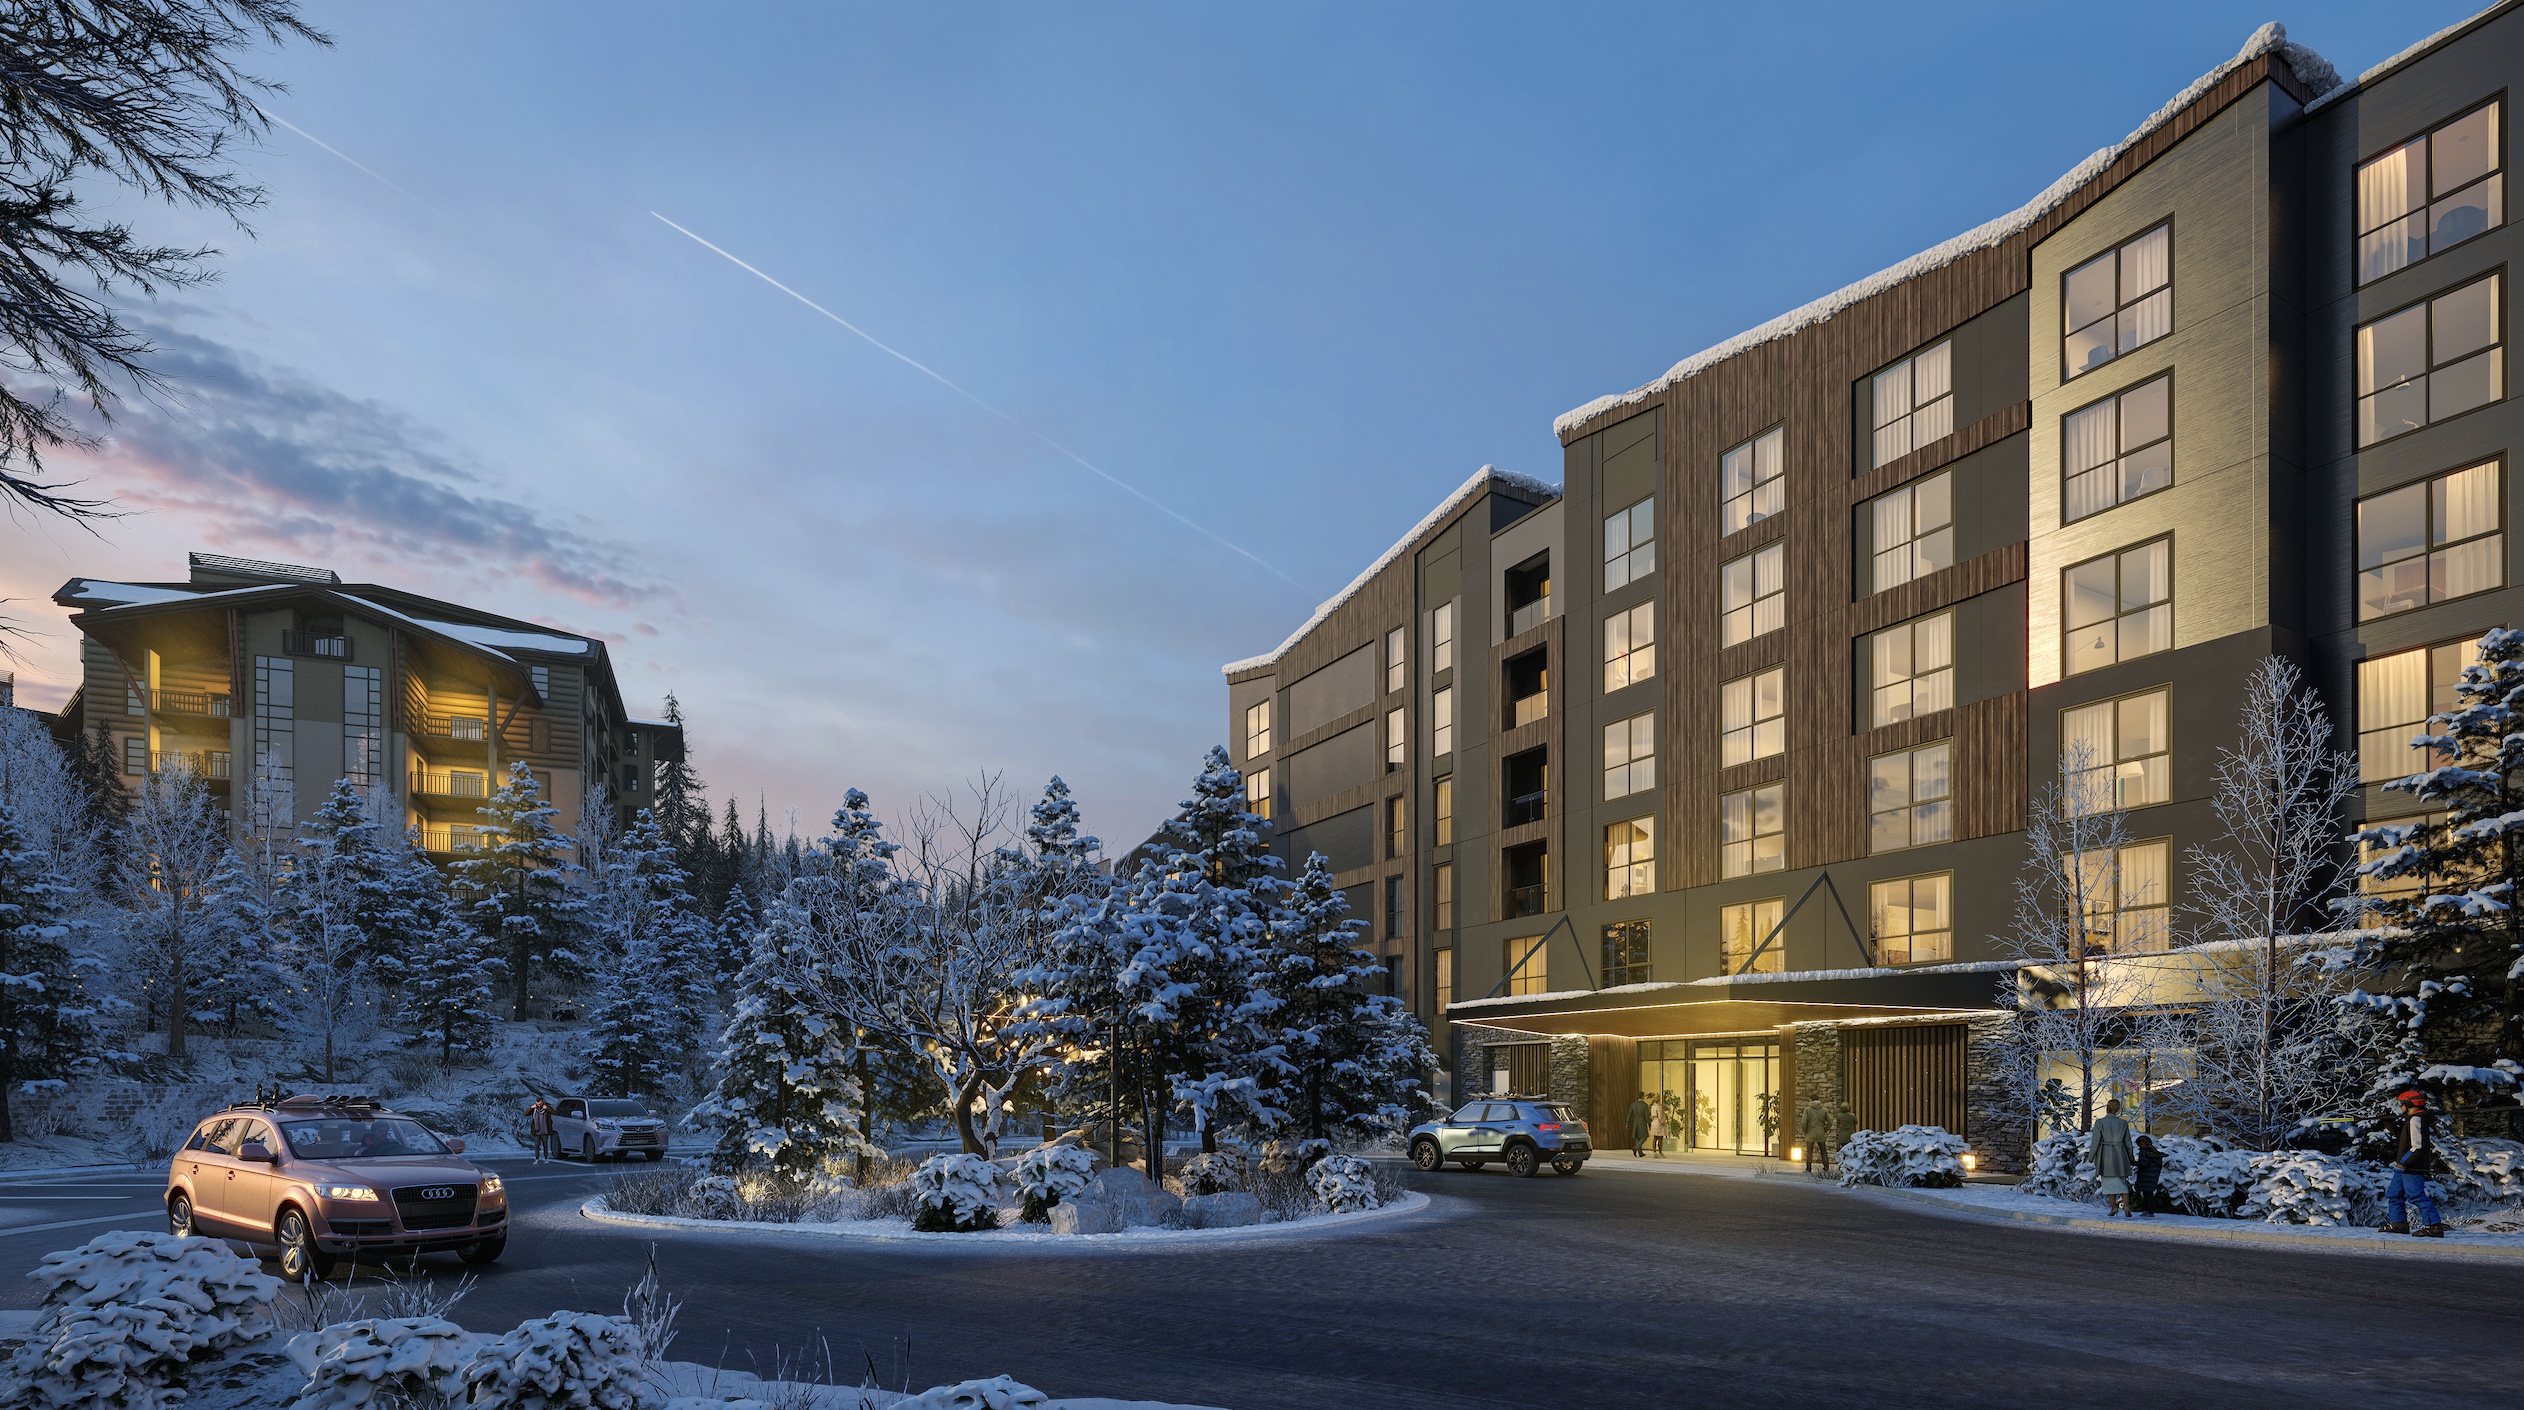 Aspen Hospitality Unveils Limelight Residences Mammoth, A Limited Collection of 15 Mountain Homes